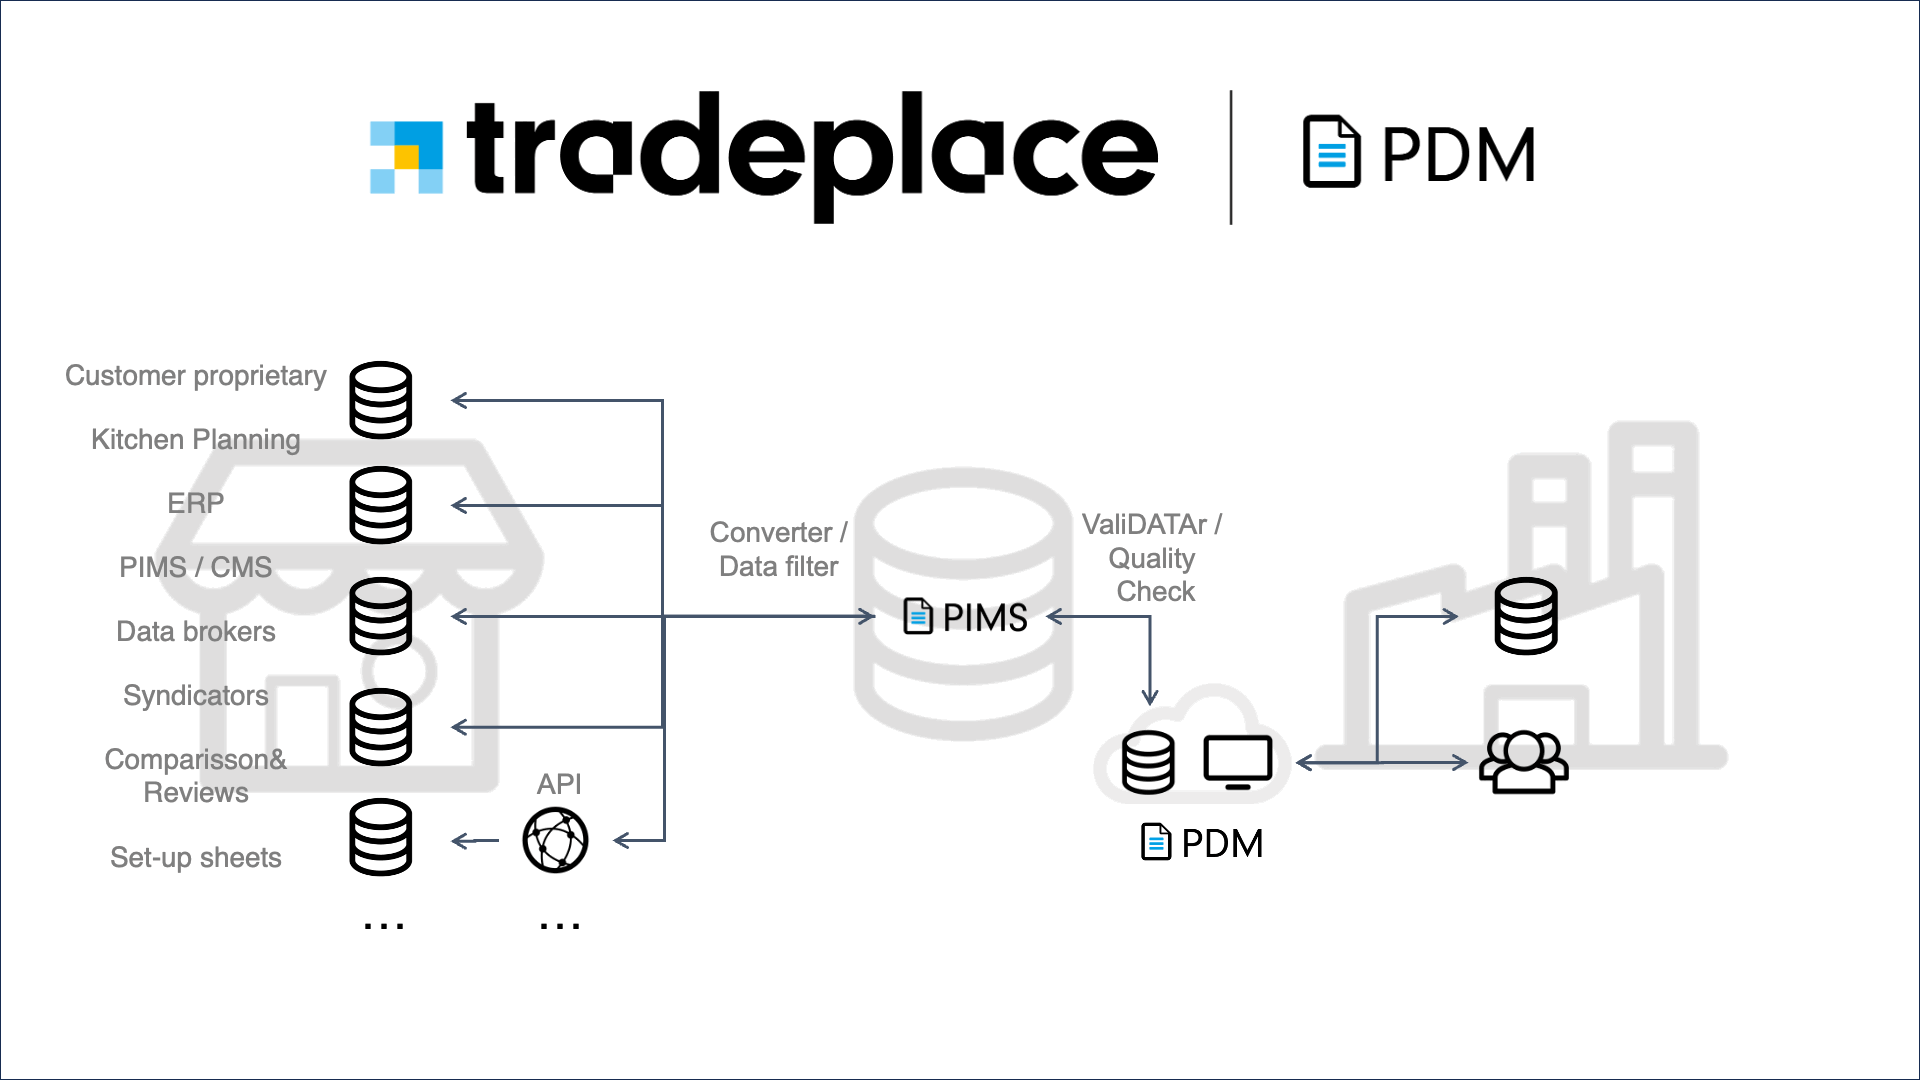 Tradeplace Product Data Management (PDM)